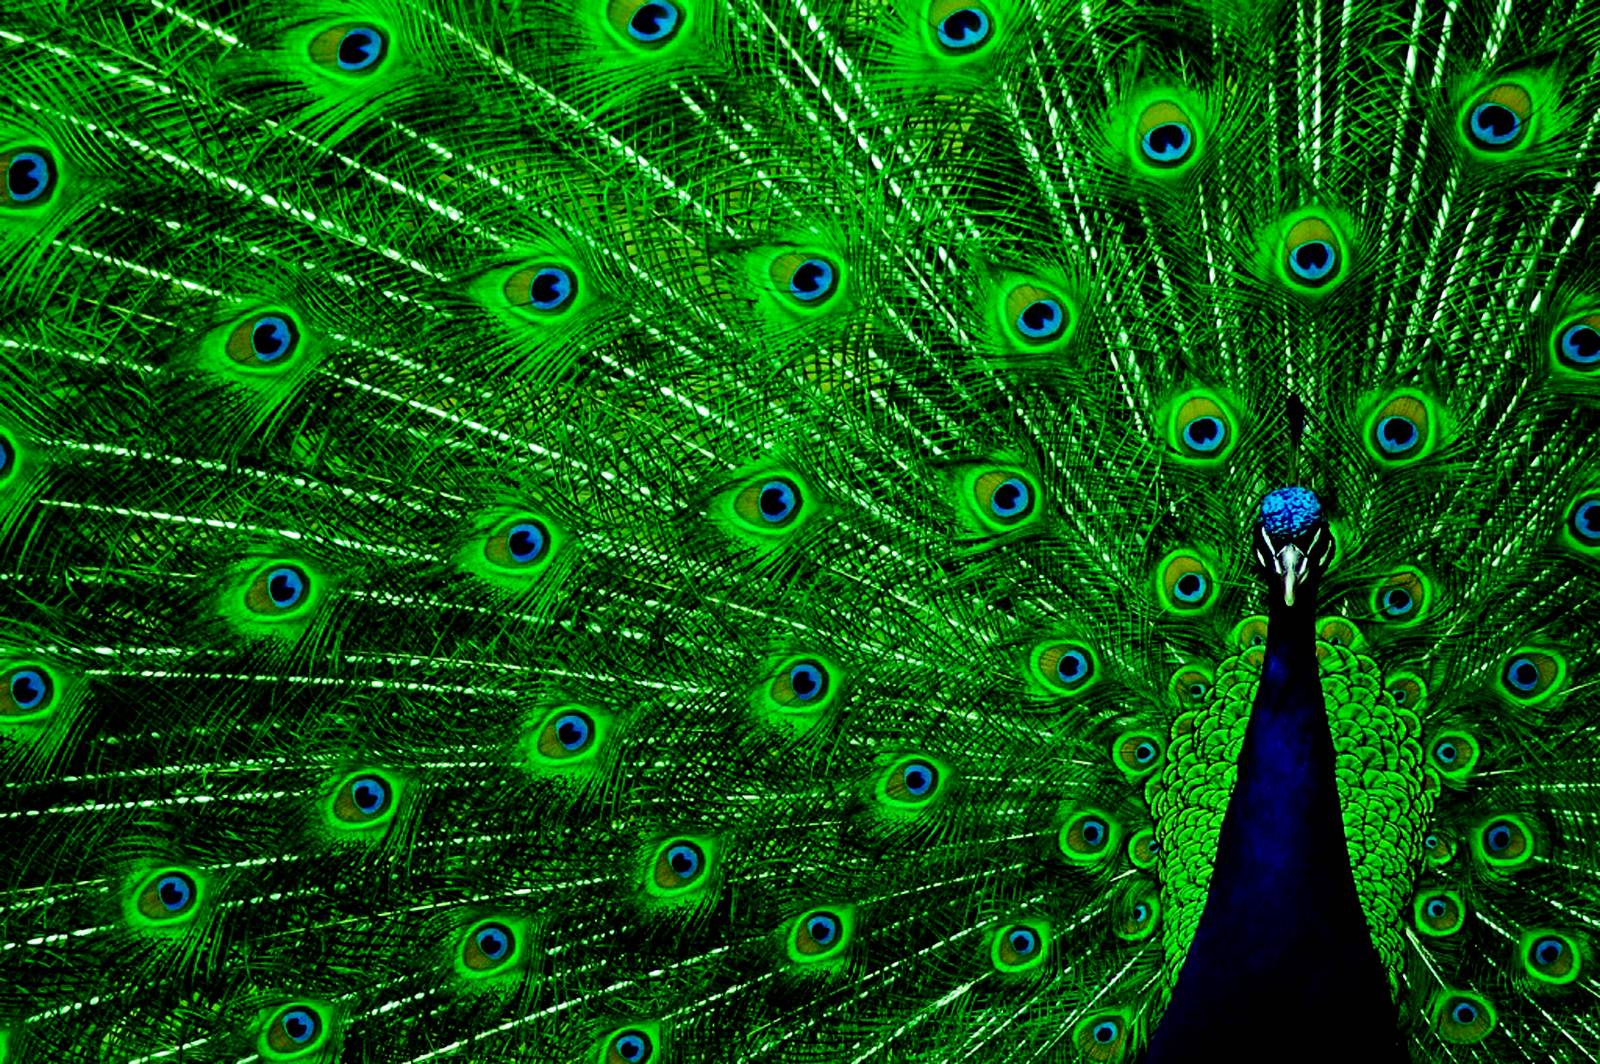 Wallpapers Of Peacock Feathers HD 2015